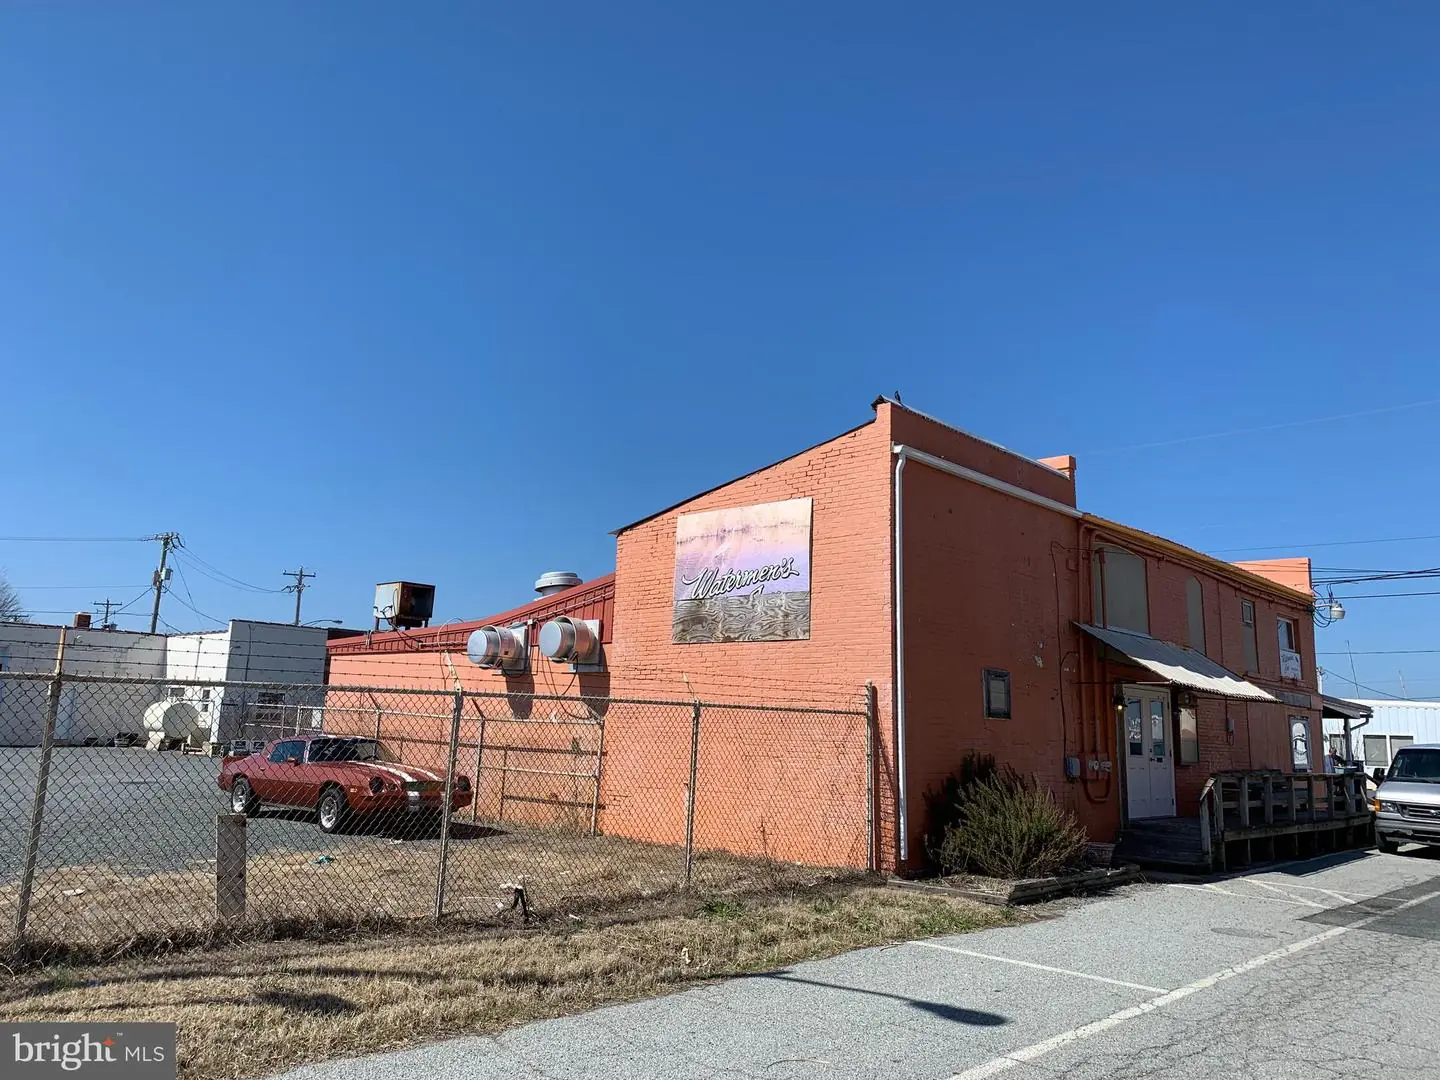 MDSO2003096-802259045044-2023-04-06-23-53-15 901 W Main St | Crisfield, MD Real Estate For Sale | MLS# Mdso2003096  - Ocean Atlantic